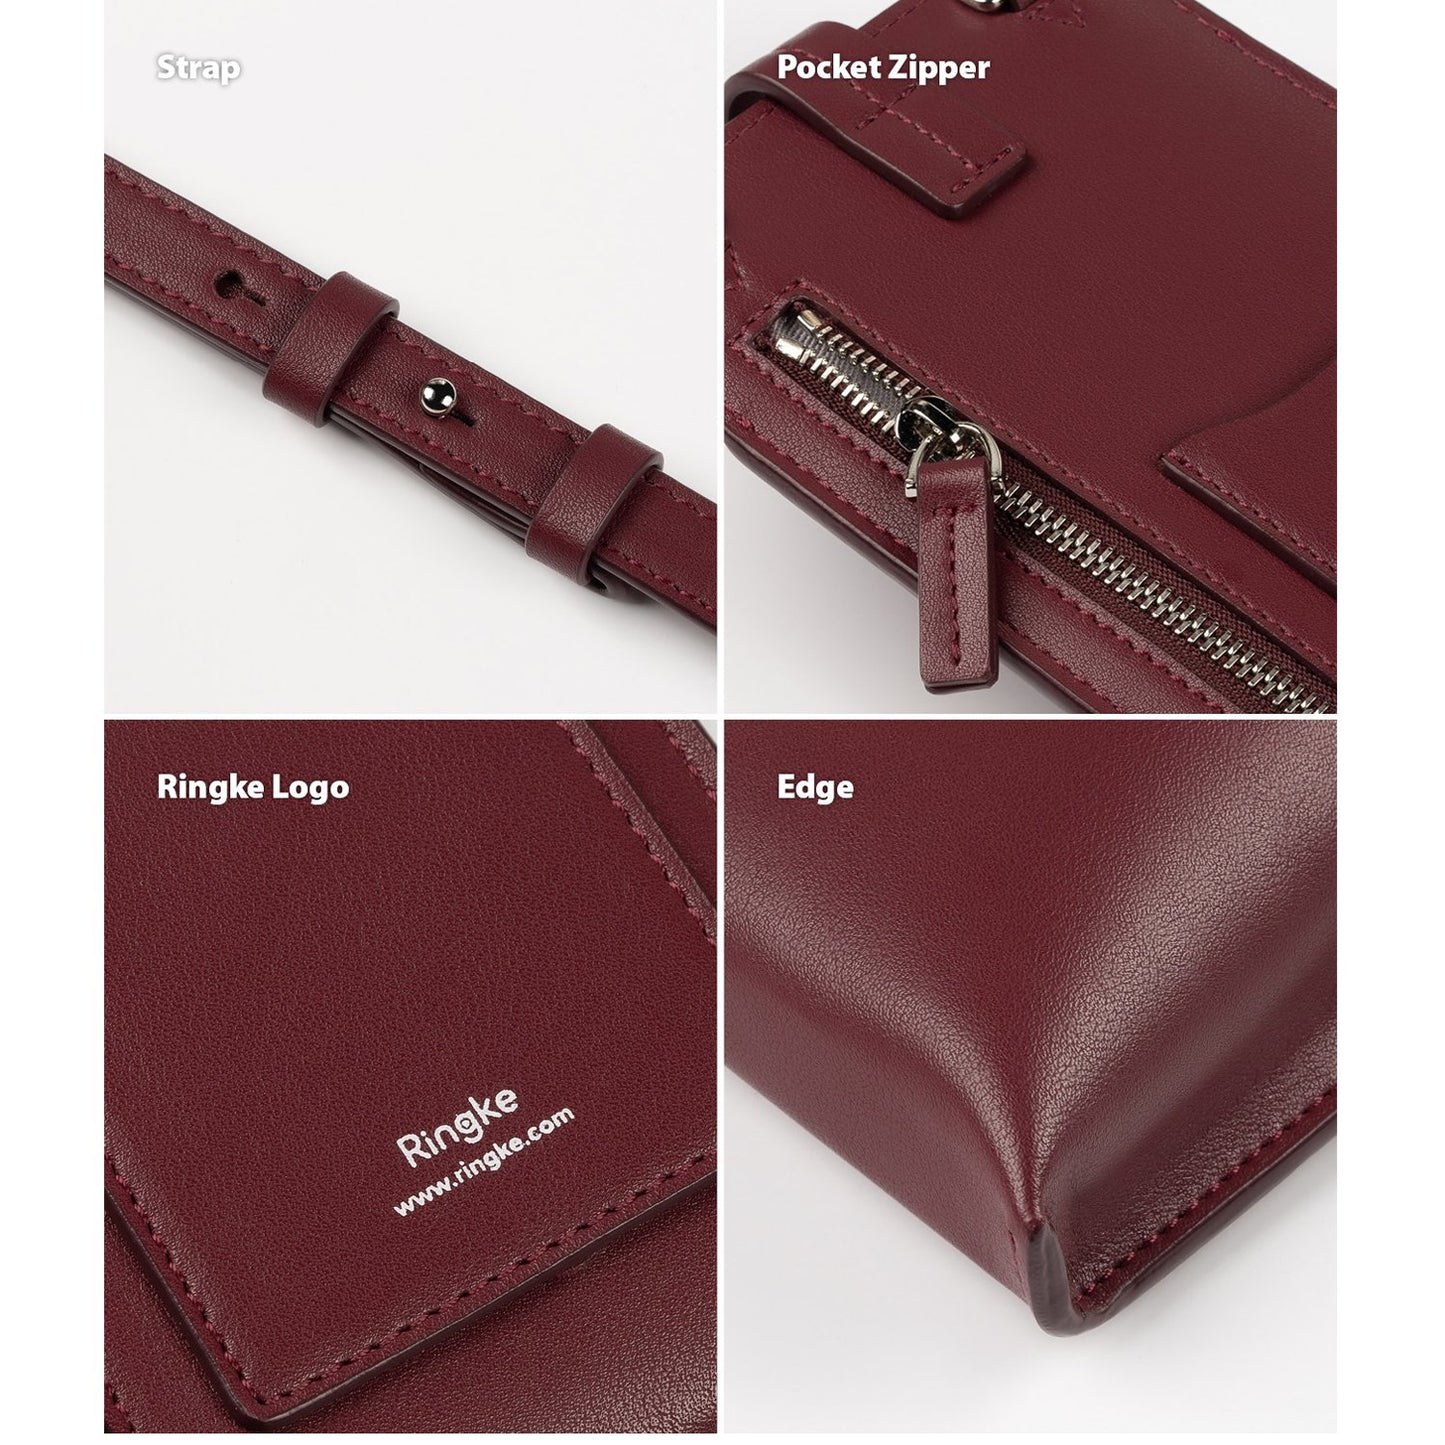 Shop and buy Ringke PU Leather Mini Cross Bag with Storage Pockets Detachable Adjustable Strap Card slot| Casefactorie® online with great deals and sales prices with fast and safe shipping. Casefactorie is the largest Singapore official authorised retailer for the largest collection of mobile premium accessories.